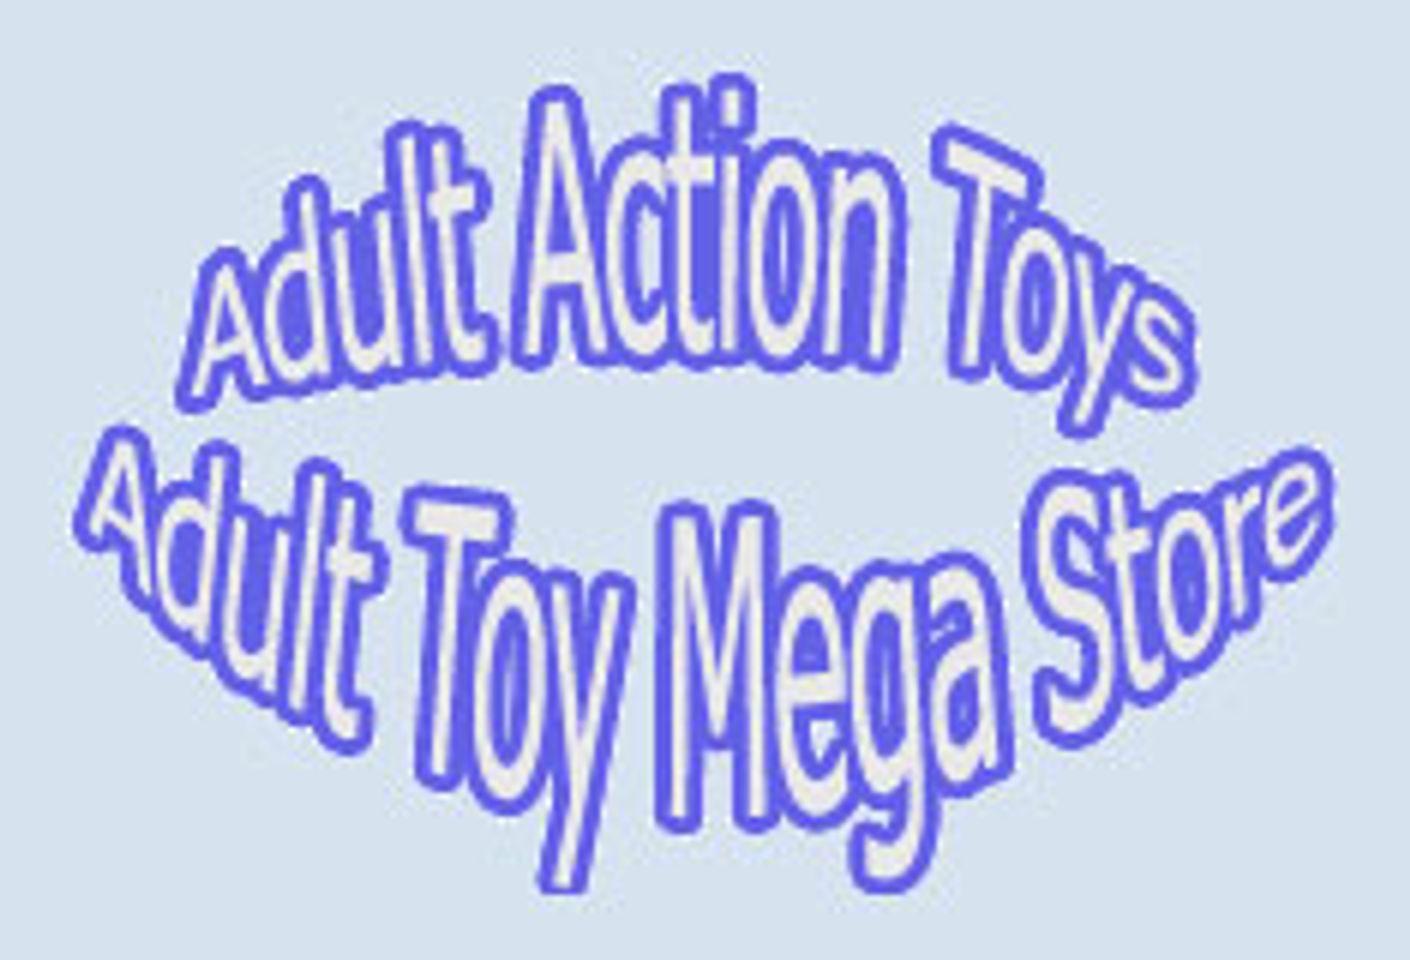 AdultActionToys.com Adds New Features